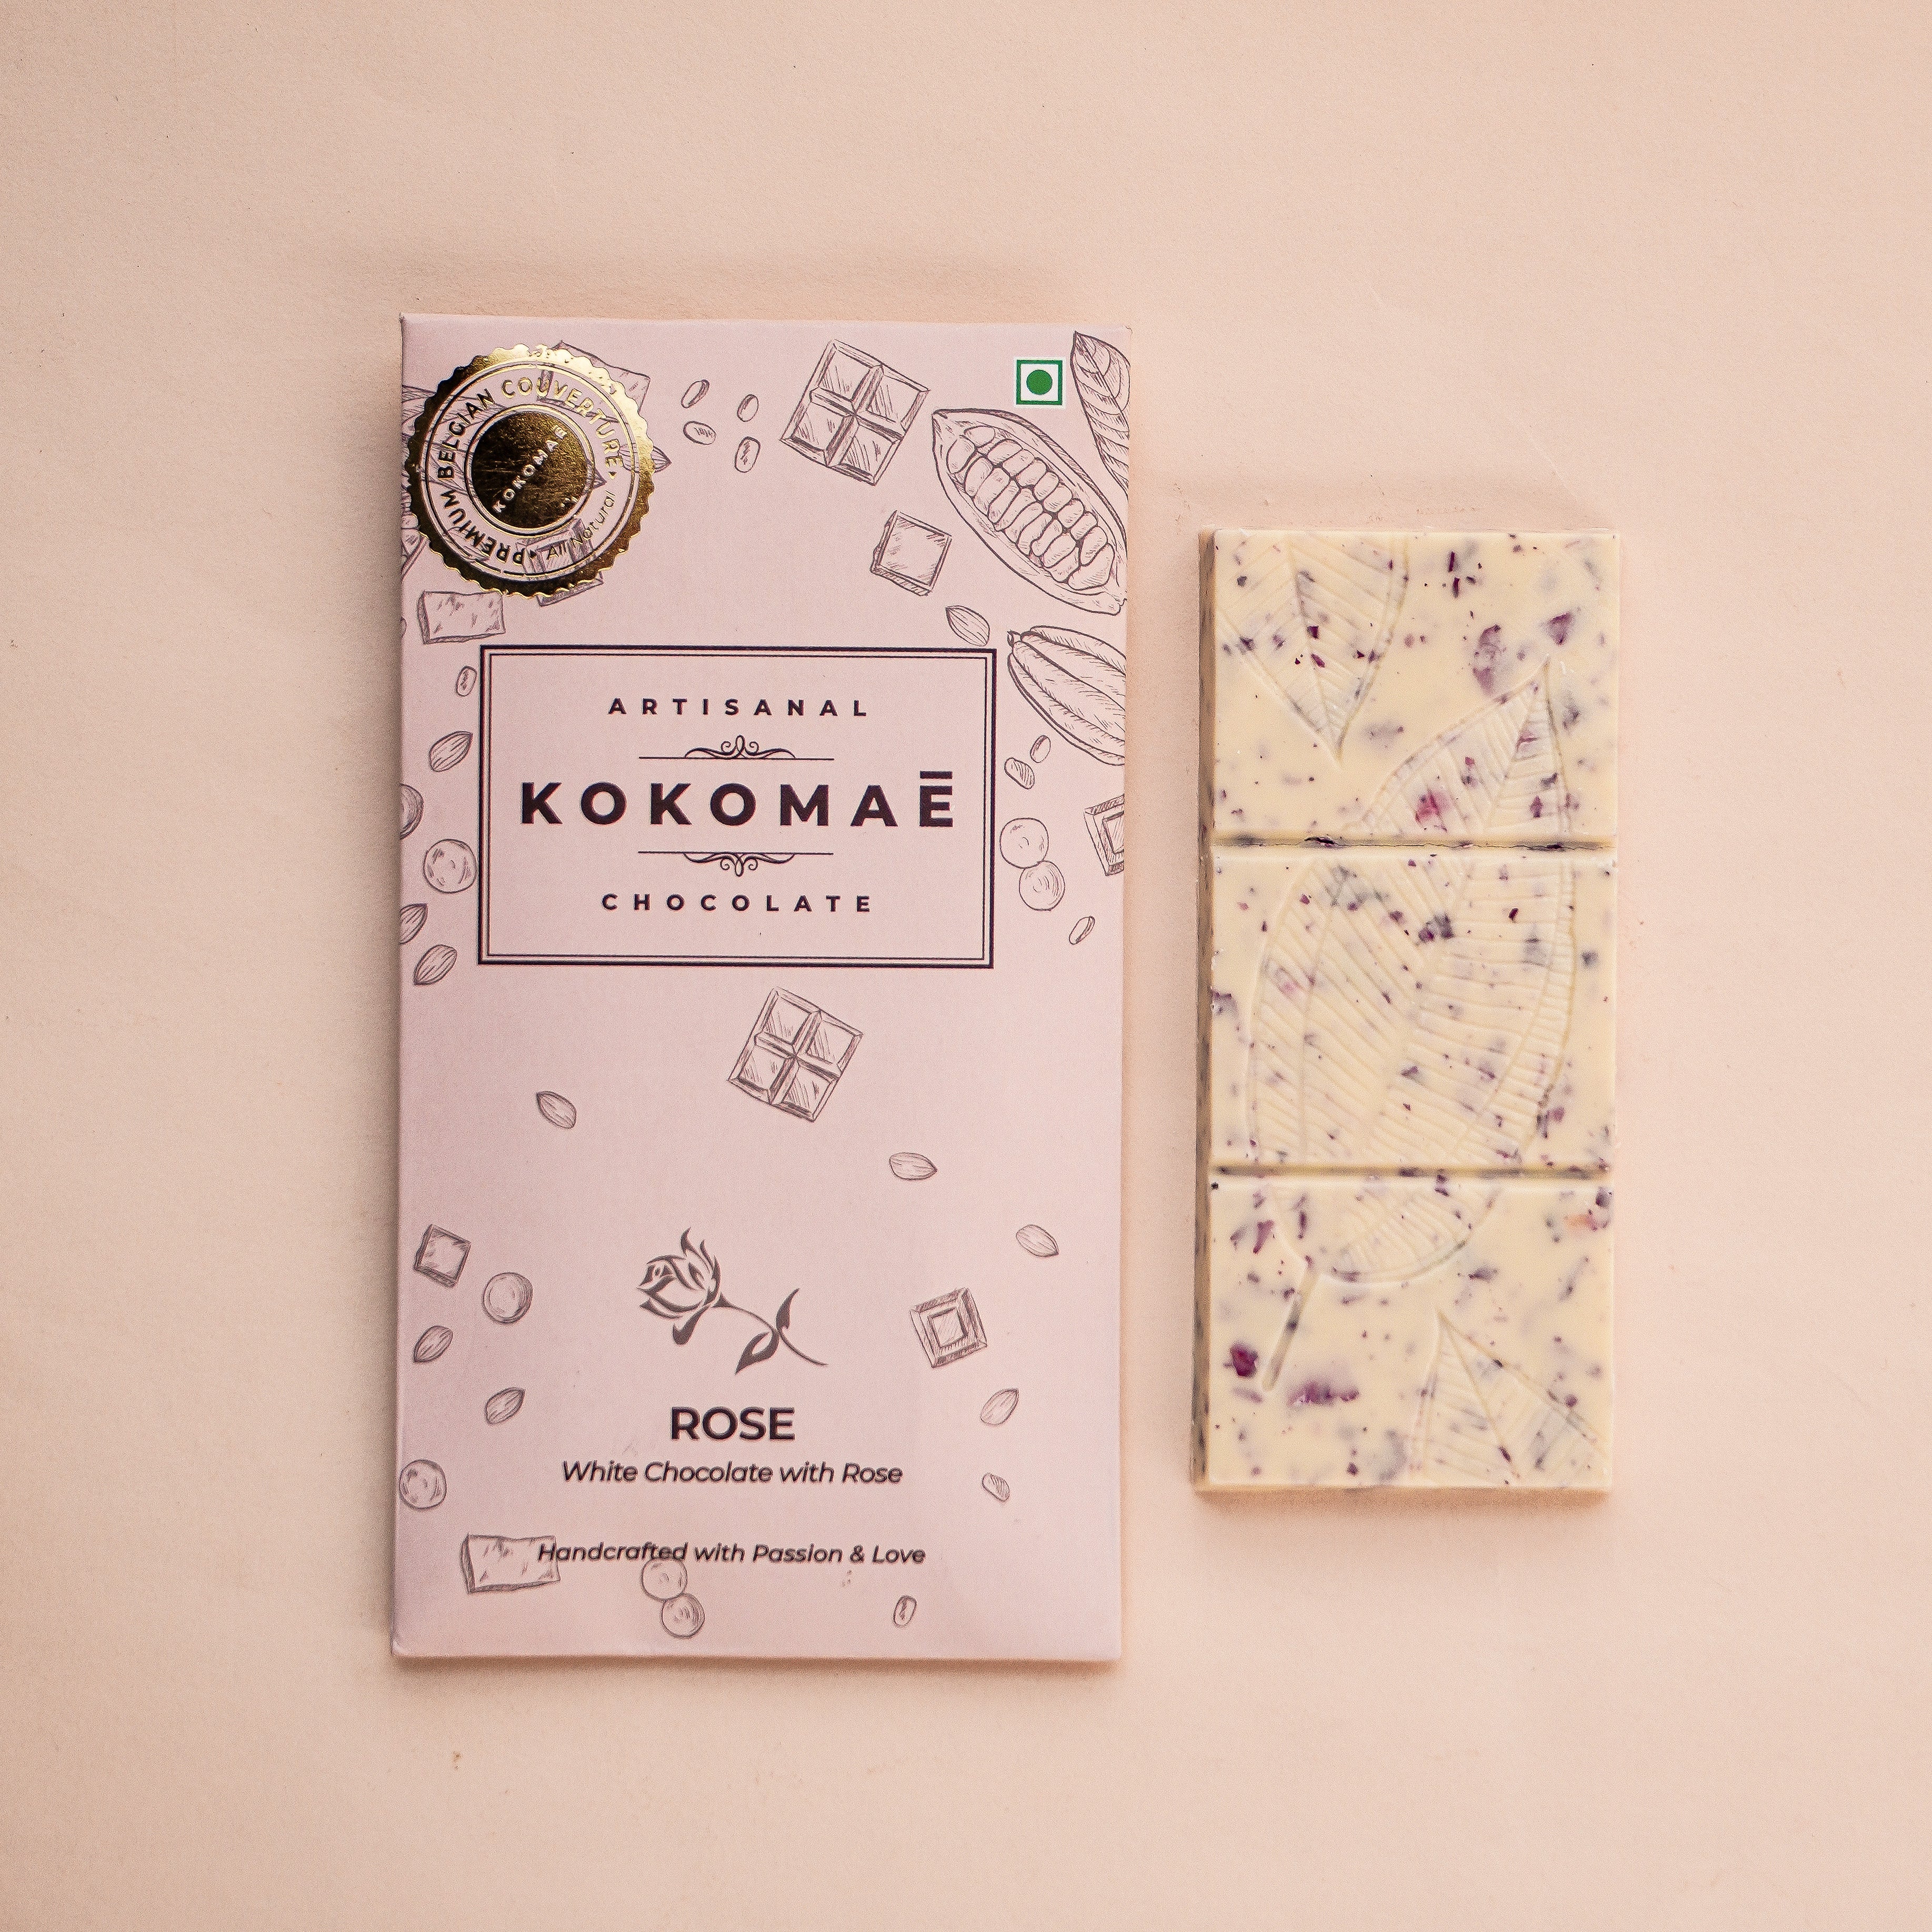 Kokomaē Premium Belgian White Chocolate Bar made from Pure Cocoa Butter with 100% Natural Rose Oil